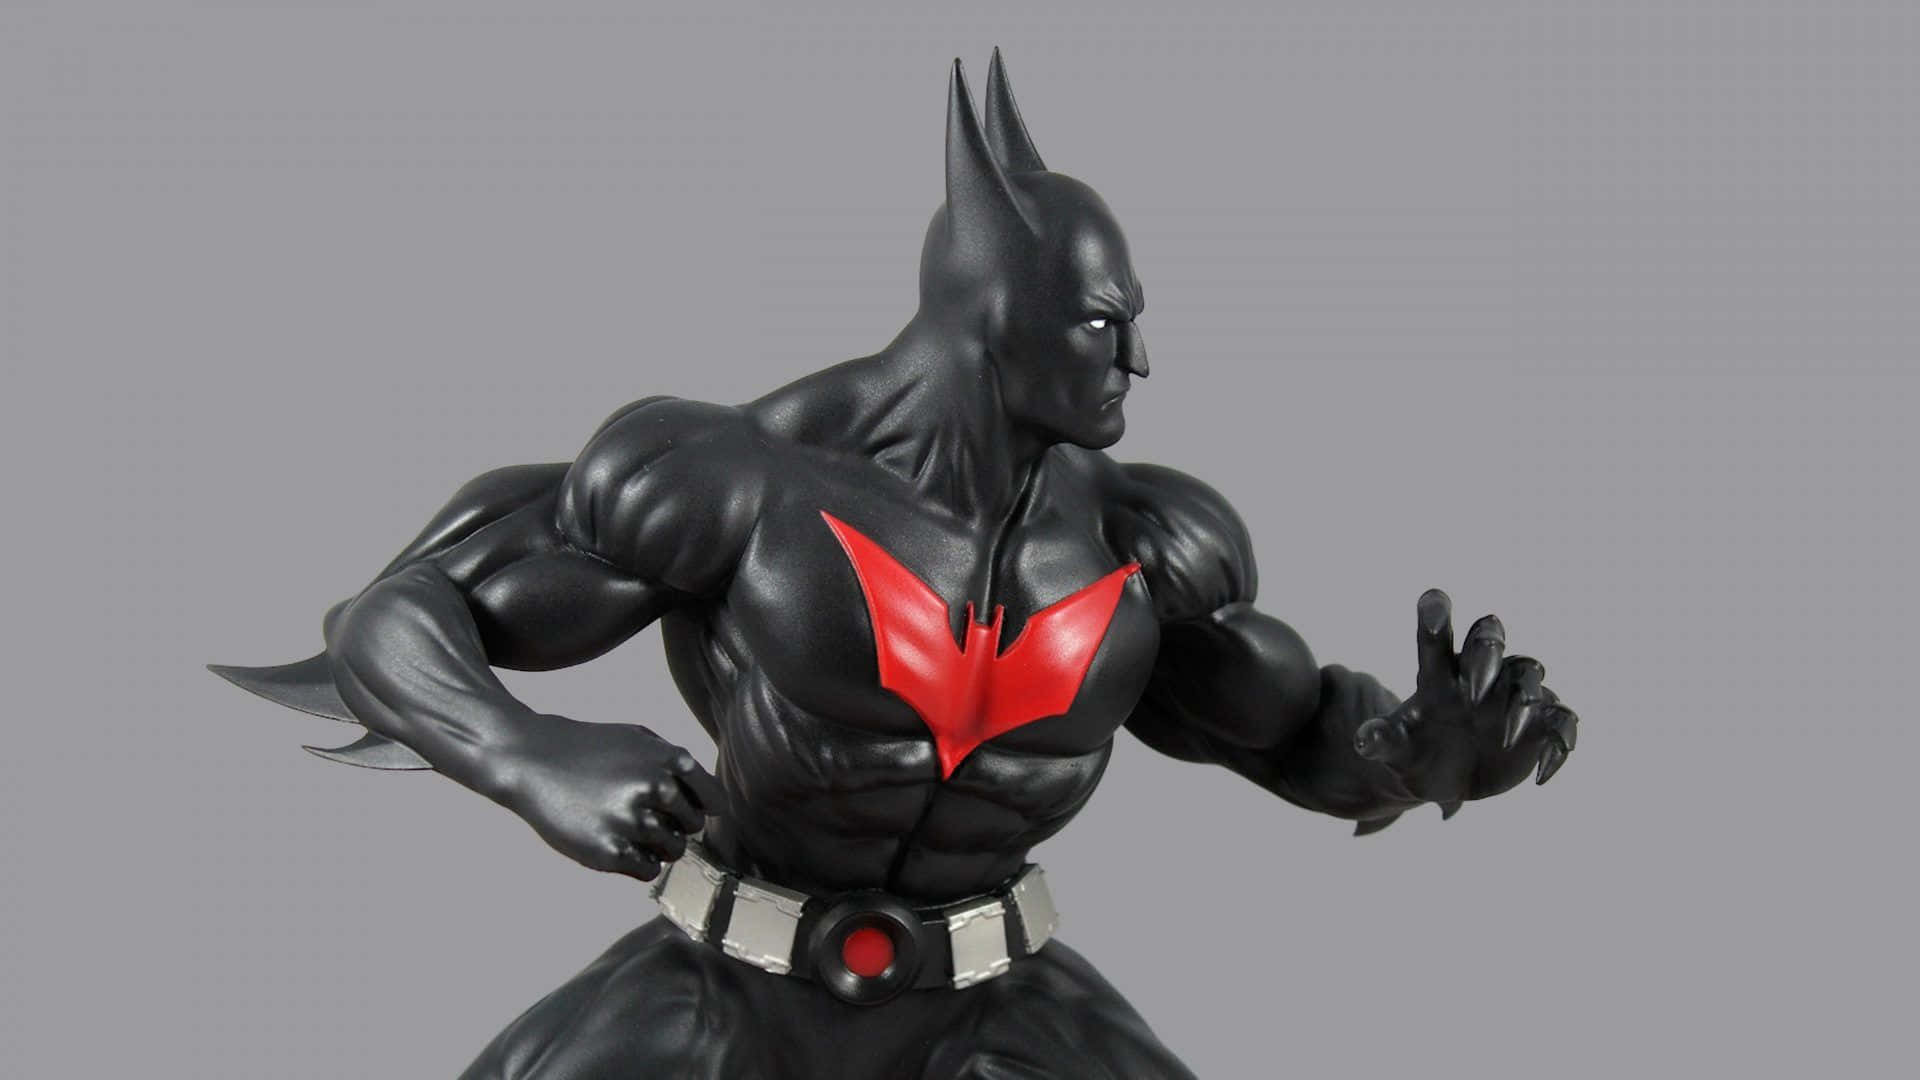 Batman Action Figure With Red And Black Costume